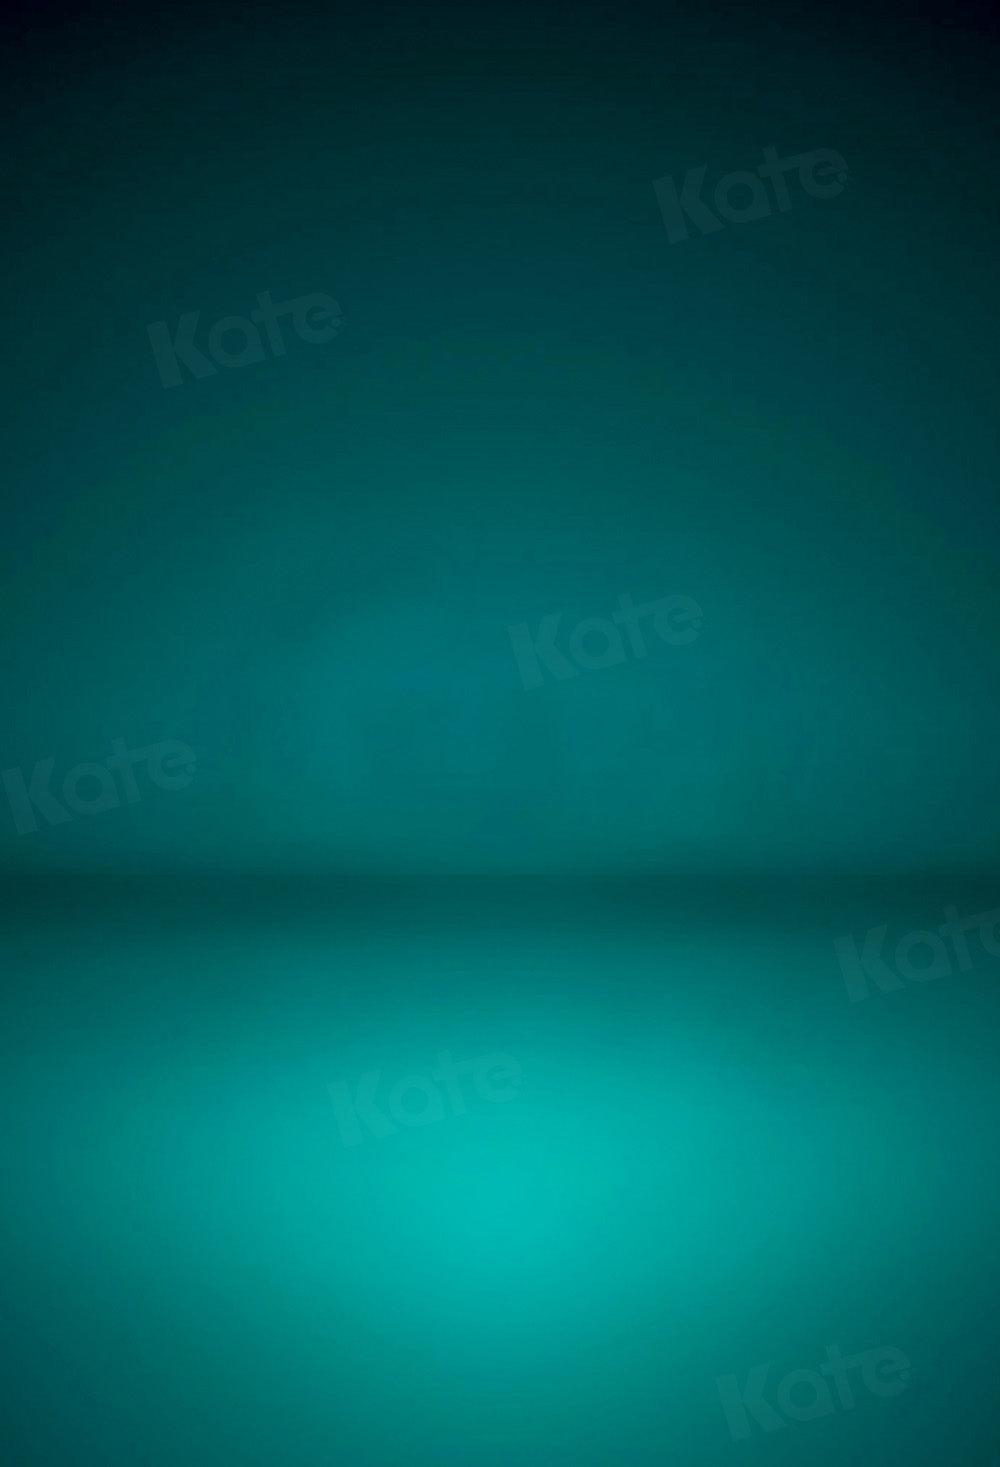 Kate Abstract Green Backdrop Fine Art Designed by Kate Image